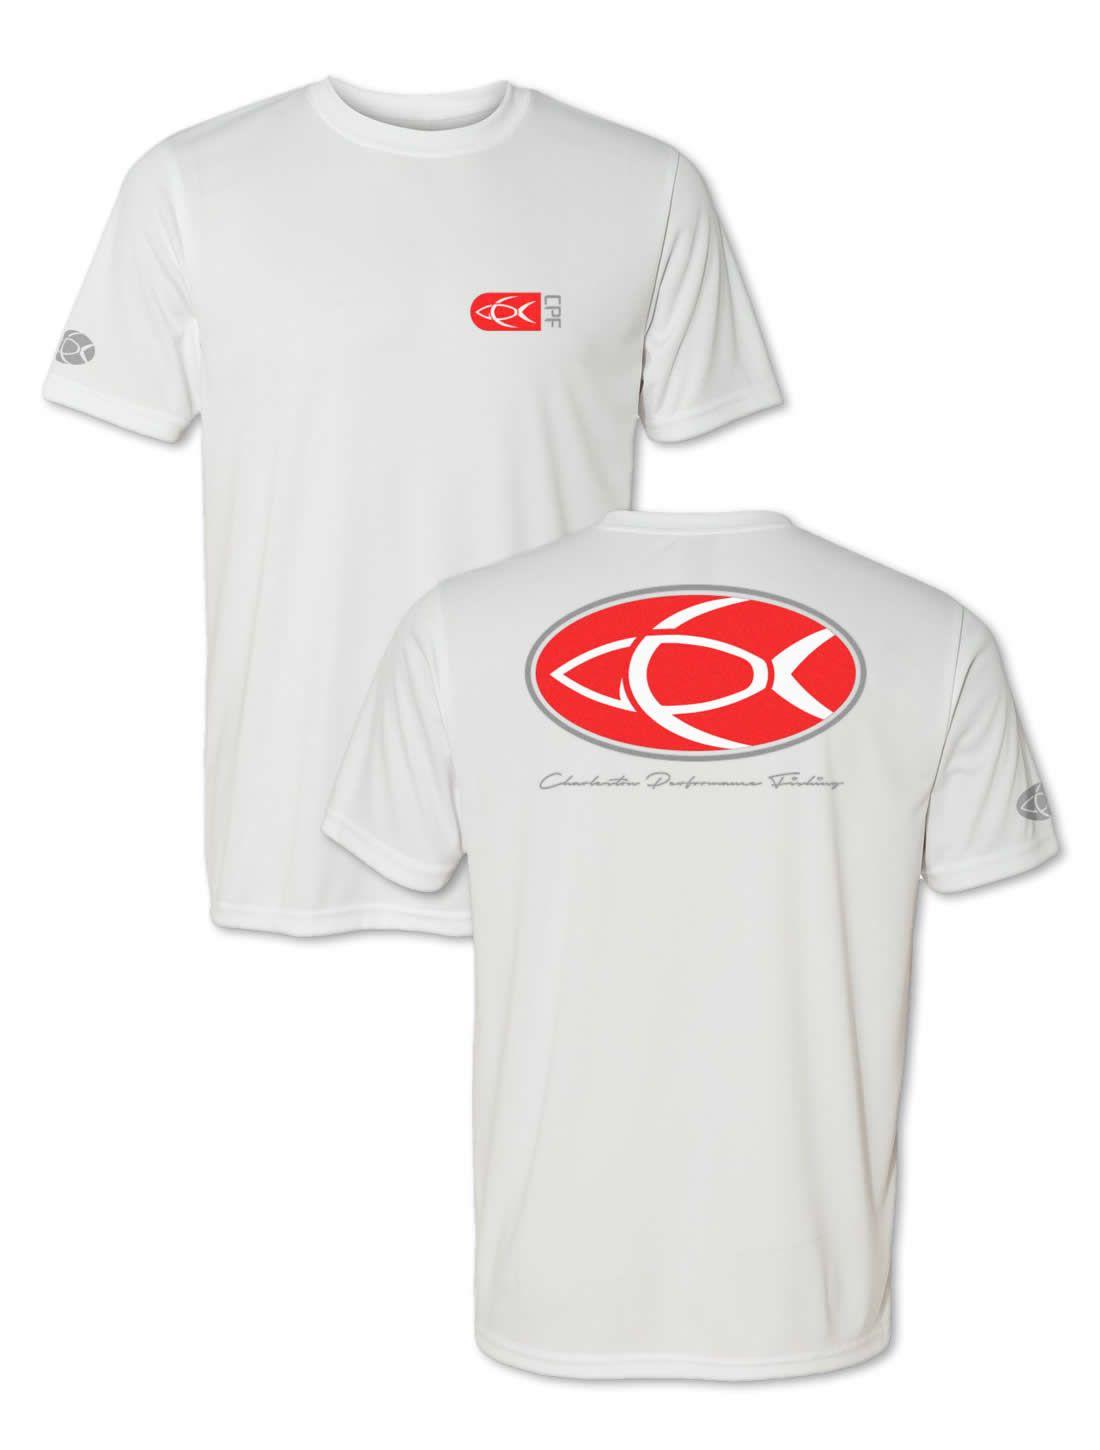 Red Oval with White a Logo - Oval Back Red Graphic White Short Sleeve Performance Fishing Shirt ...